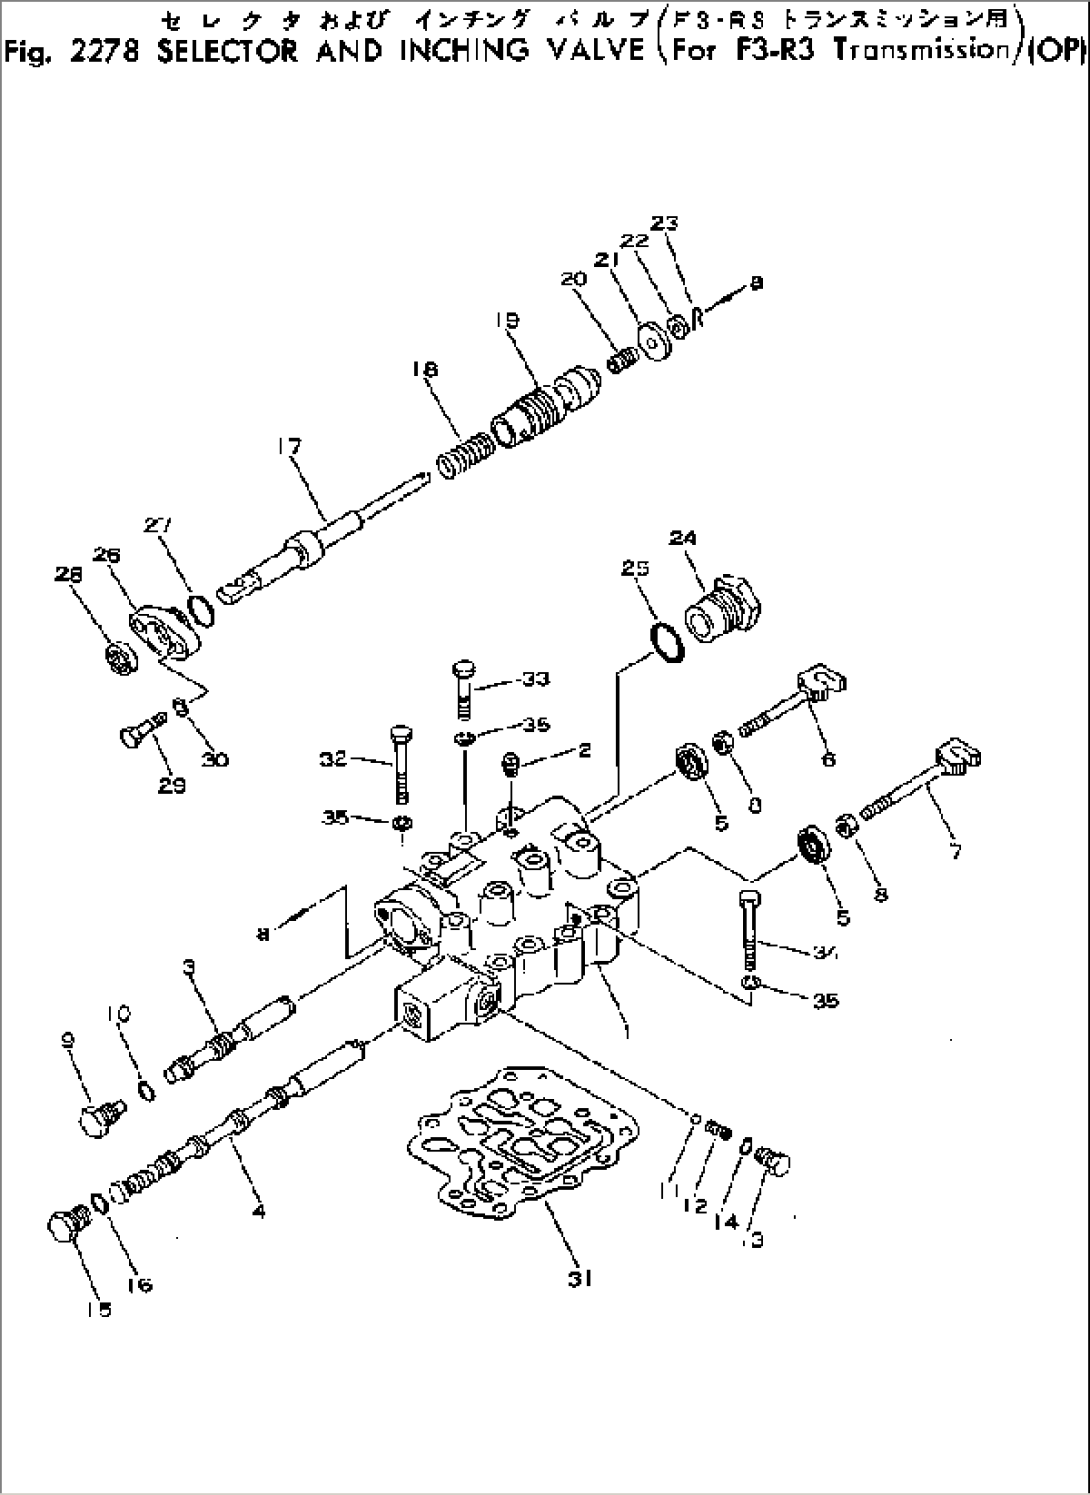 SELECTOR AND INCHING VALVE (FOR F3-R3 TRANSMISSION)